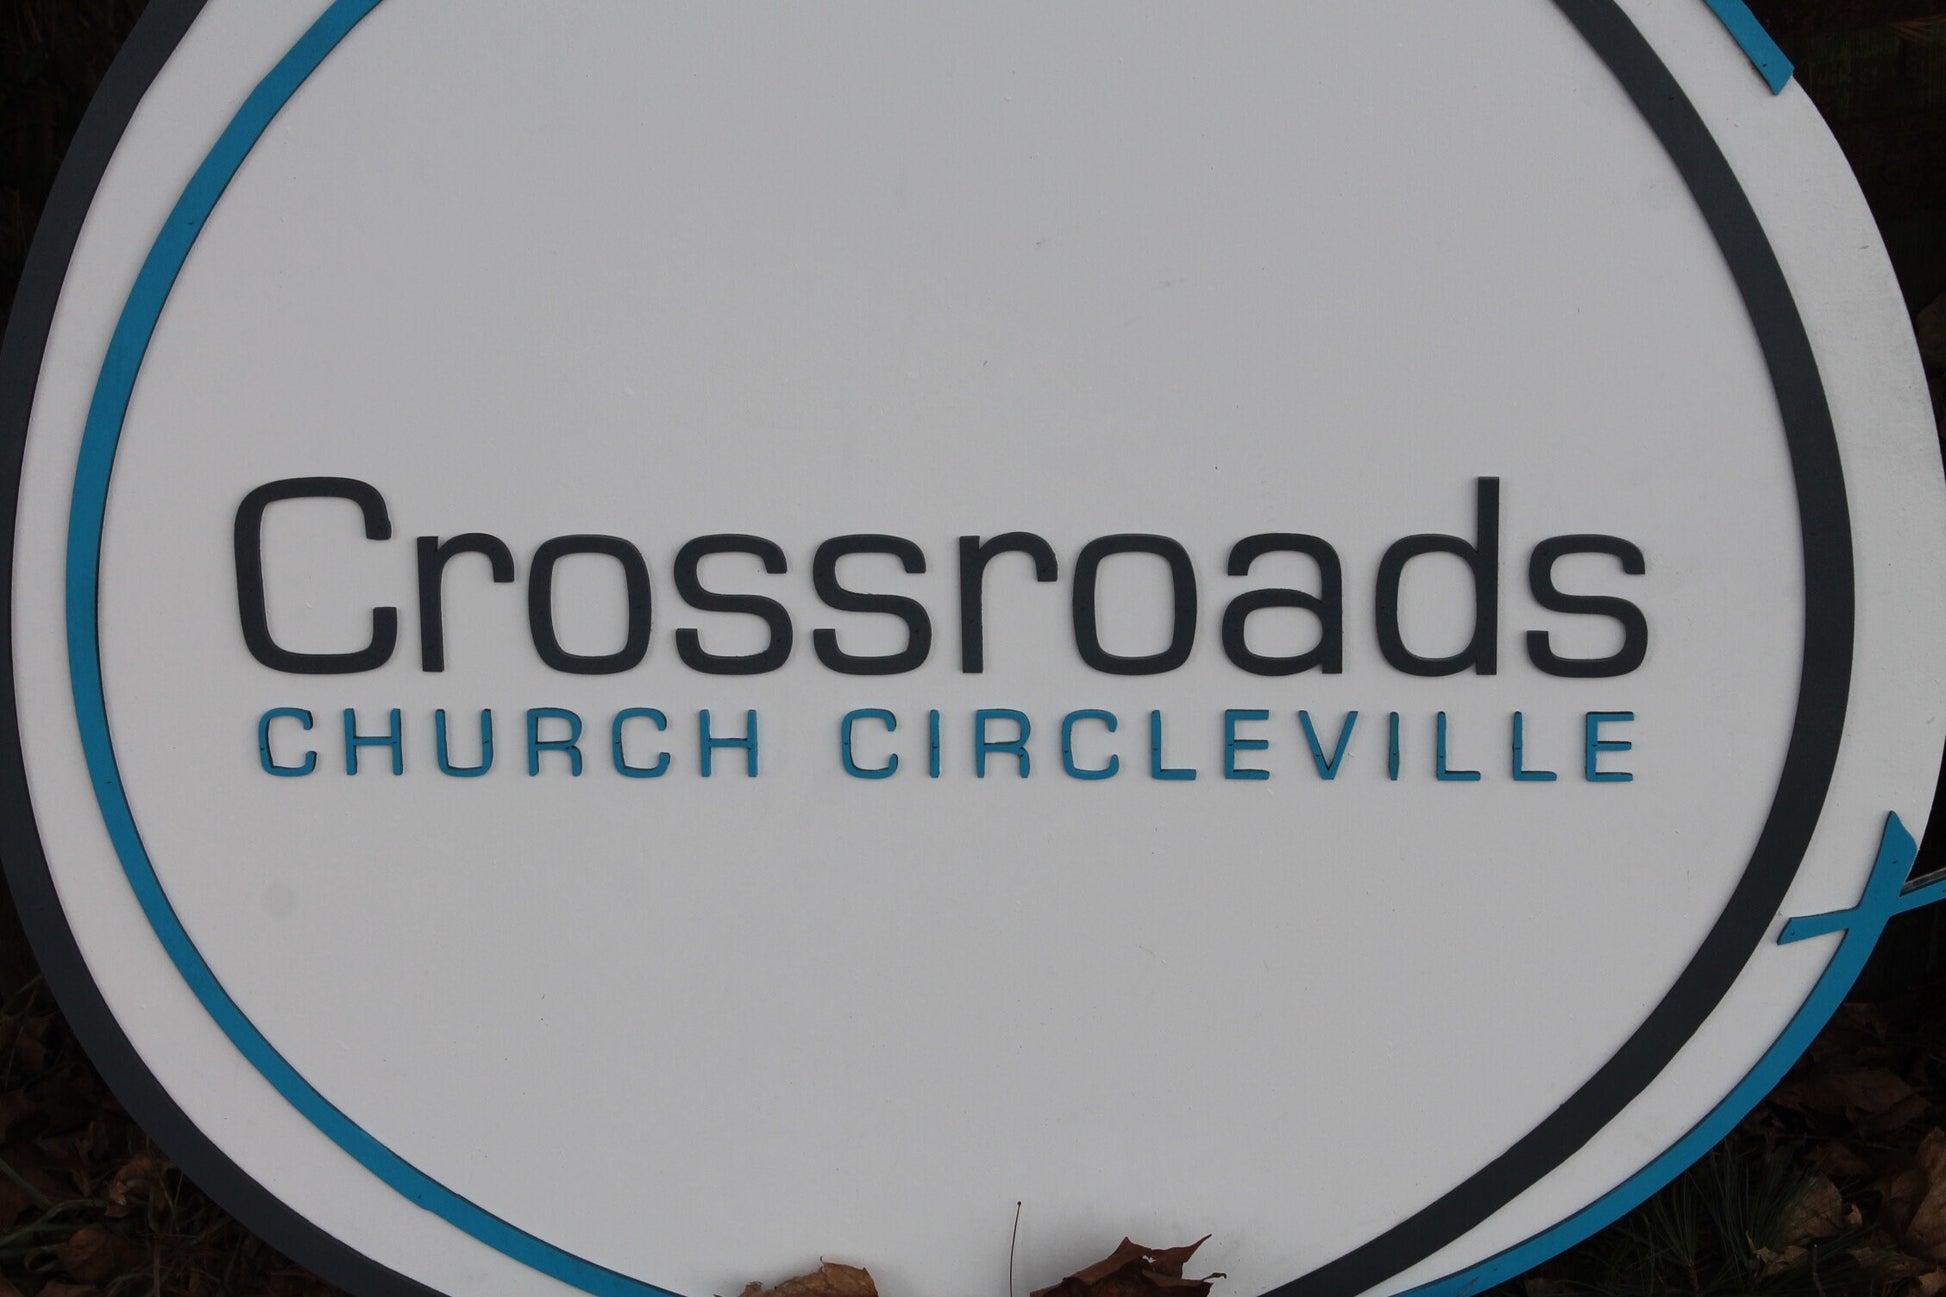 Custom Round Church Business Commerical Signage Made To Order Crossroads Ministry Store Front Small Business Sign Logo Circle Wooden 3D